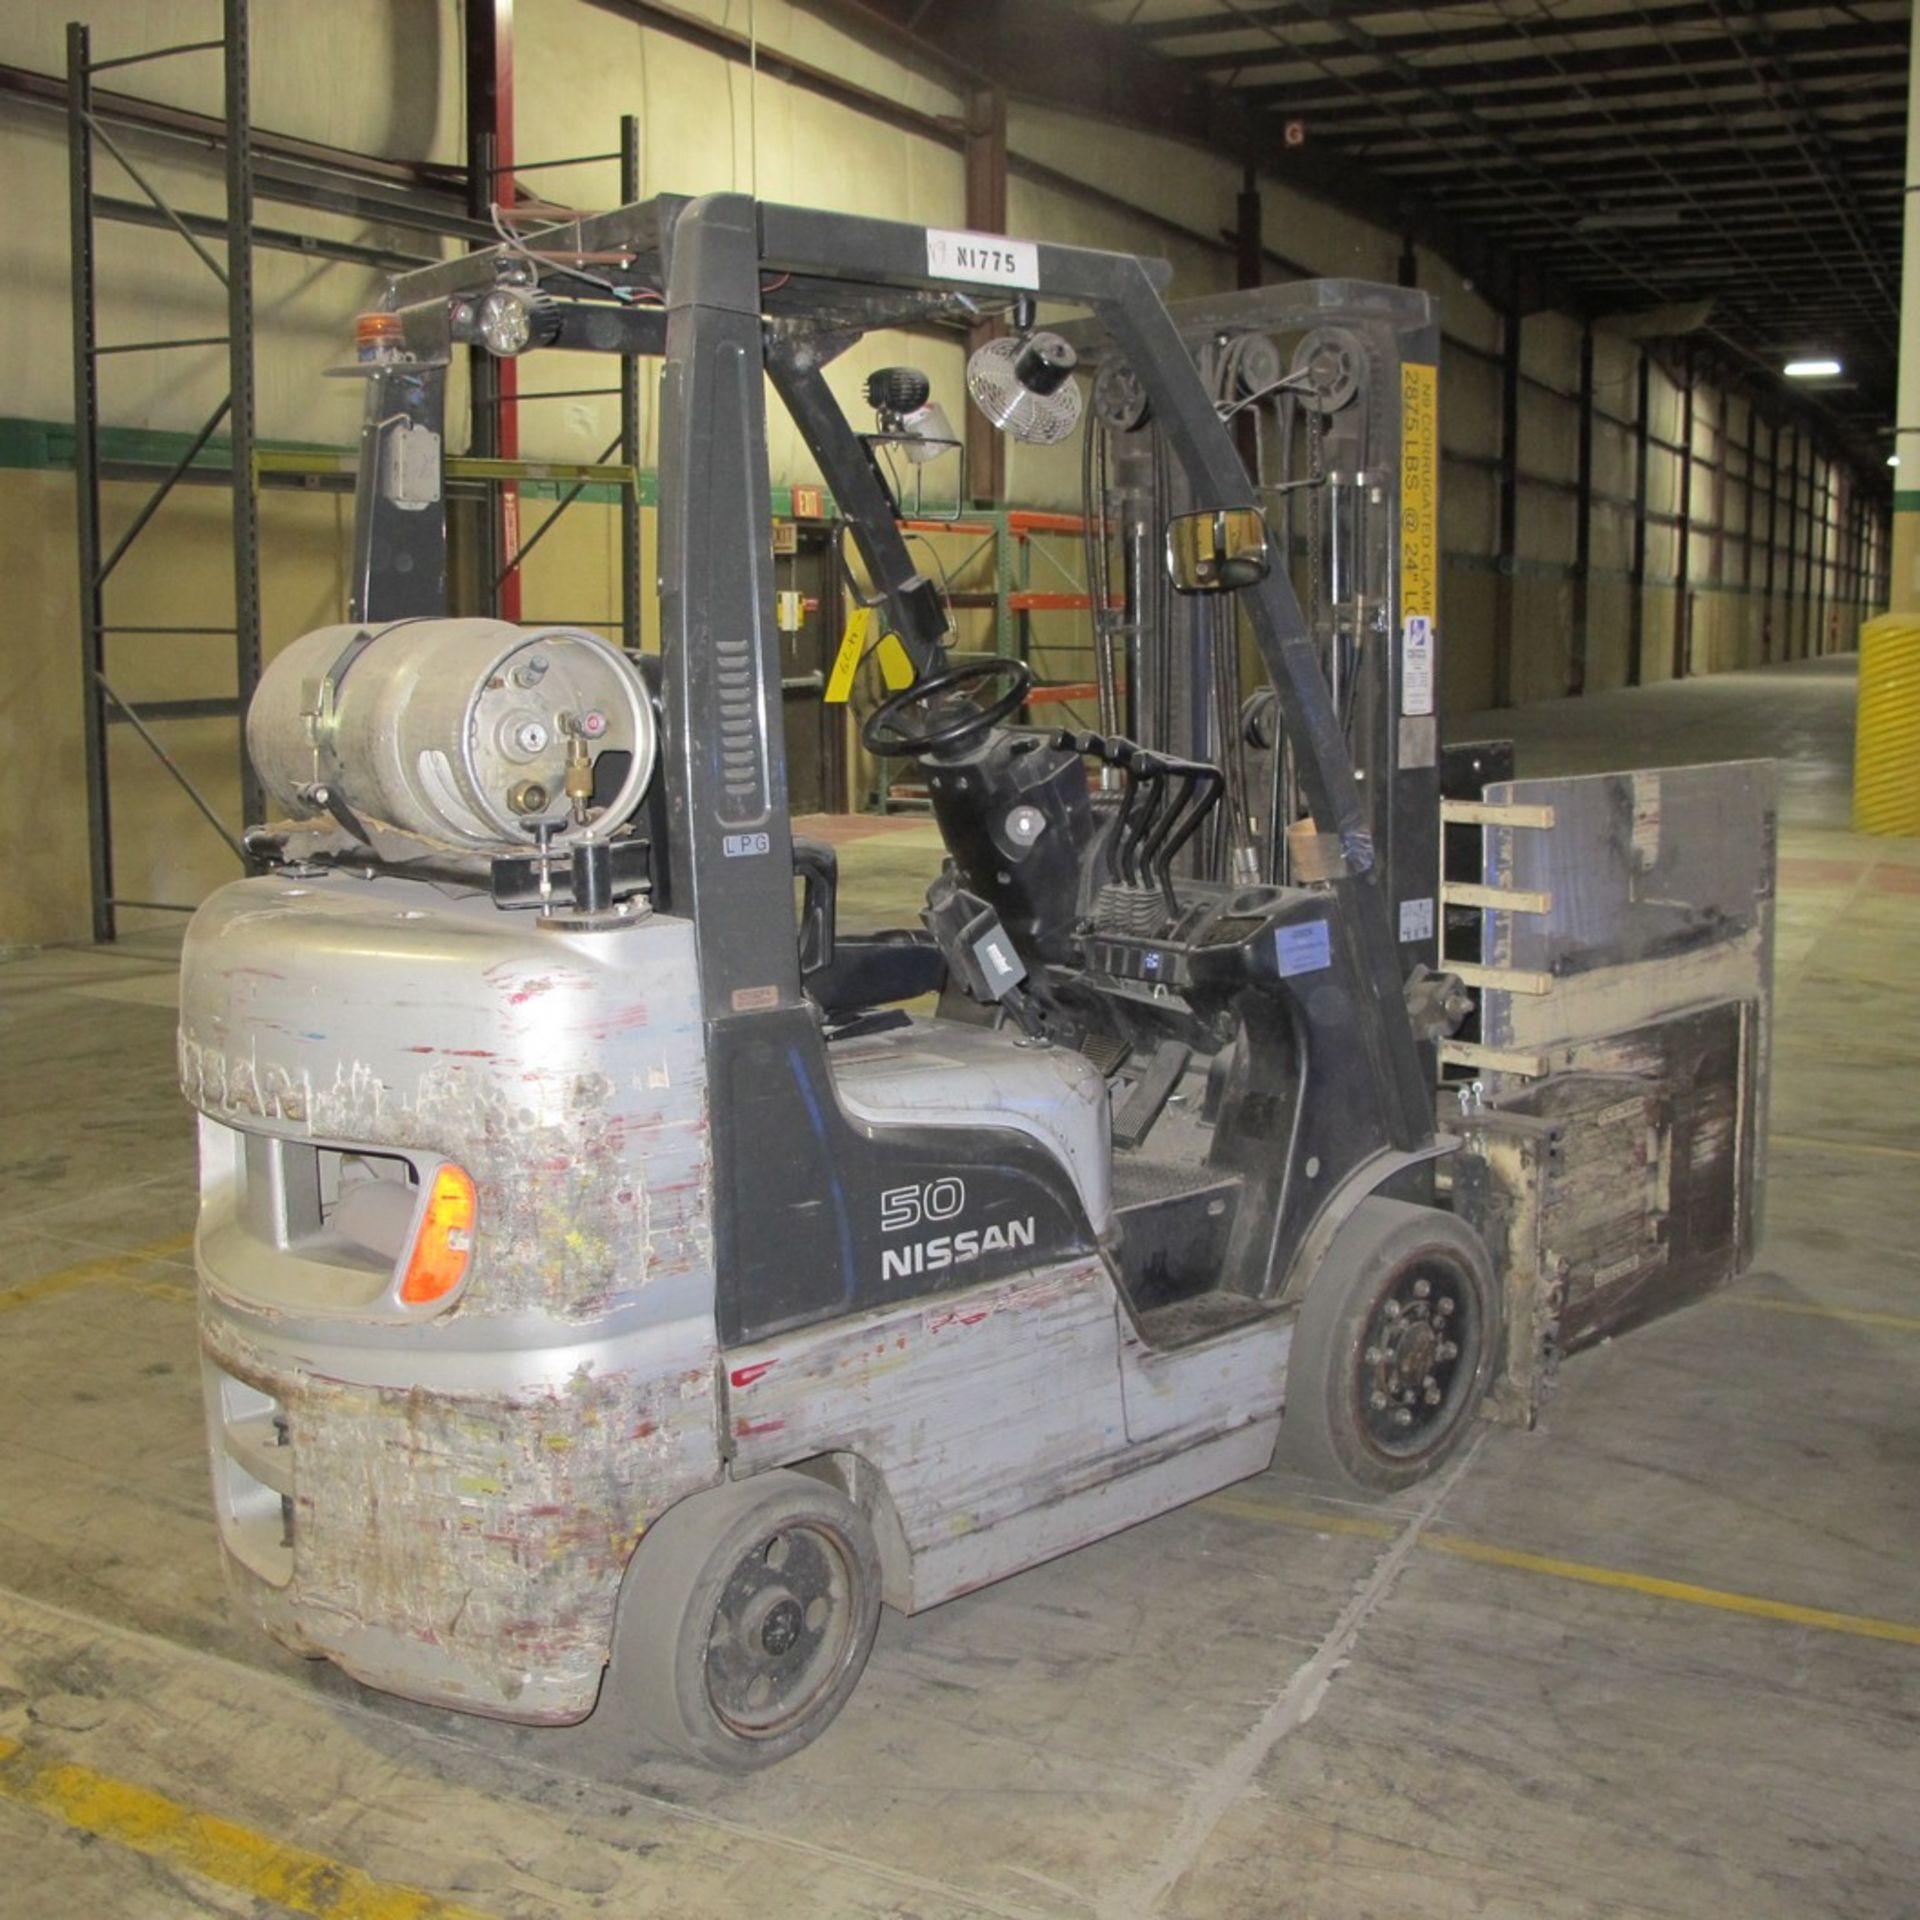 NISSAN 50MCU1F2A25LV PROPANE FORKLIFT W/ CASCADE HYDRAULIC CLAMP ATATCHMENT (SOUTHEAST PLANT) - Image 3 of 11